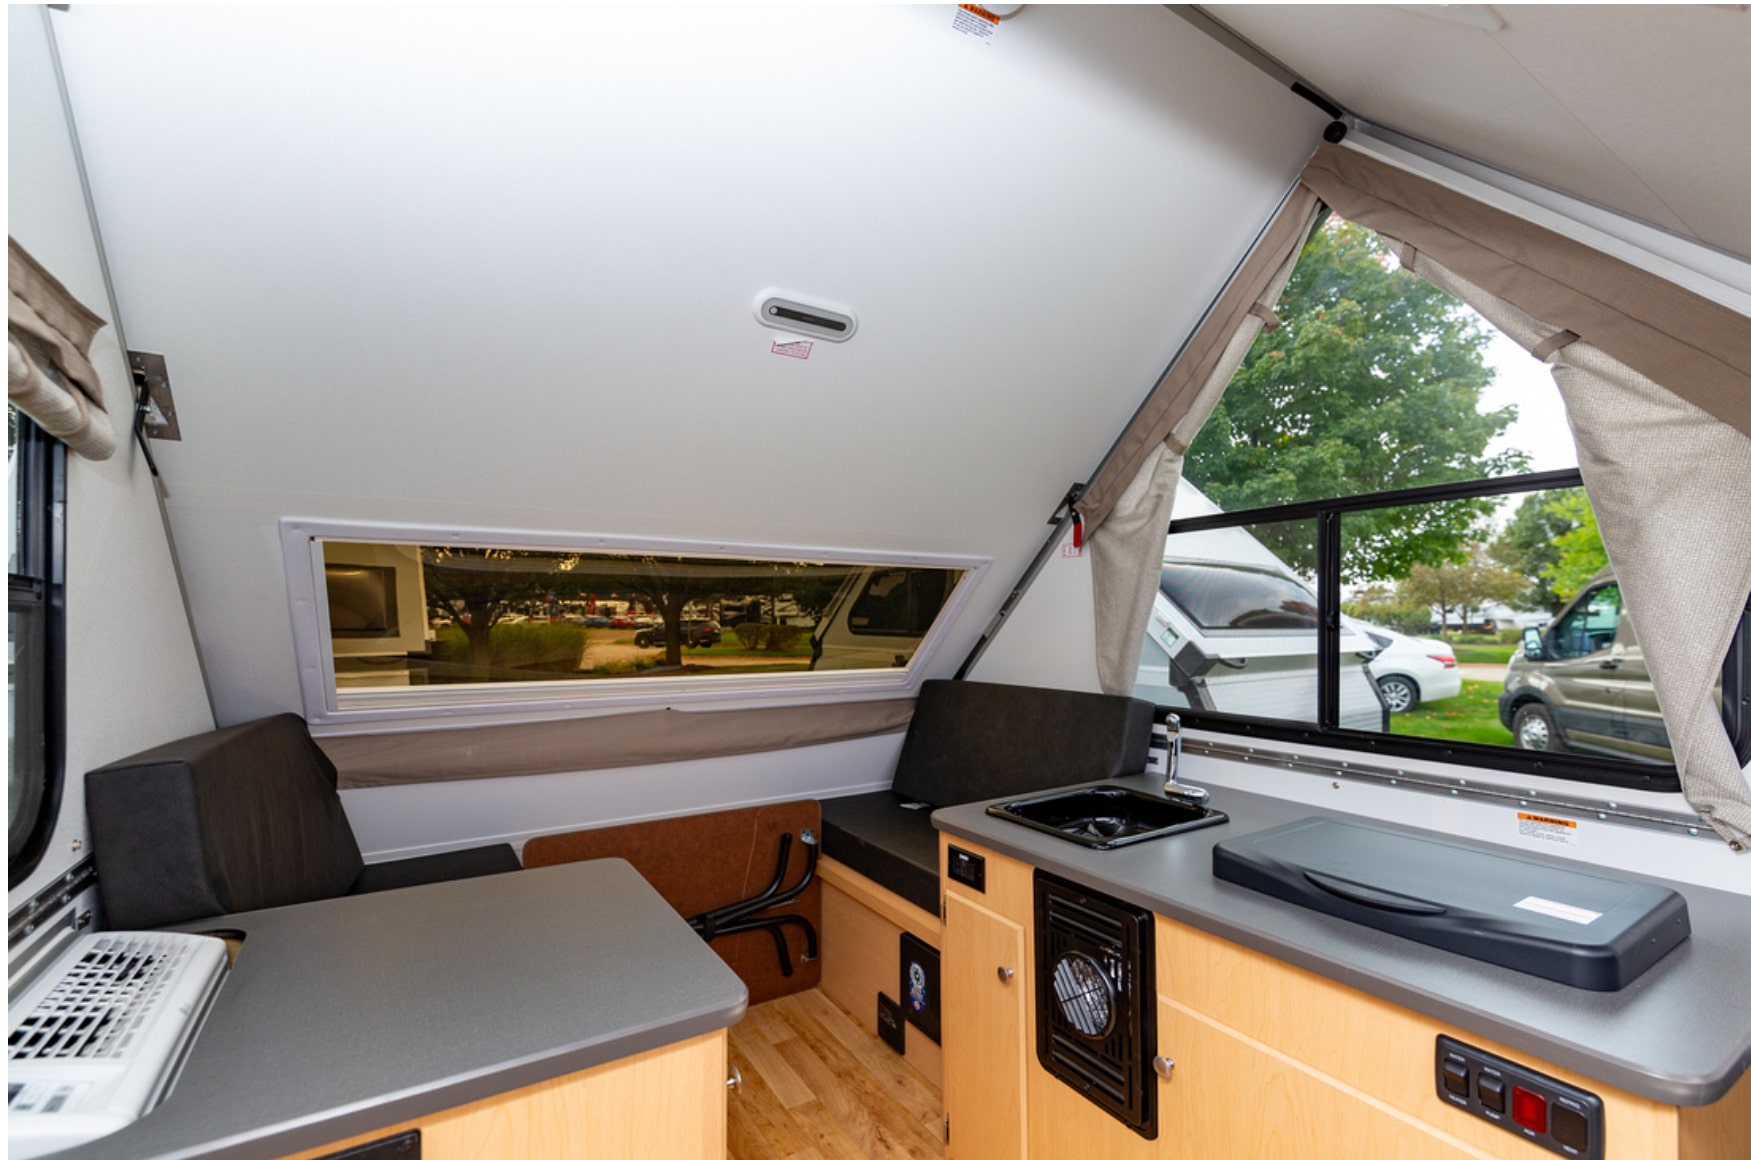 The interior of an rv with a table and chairs.